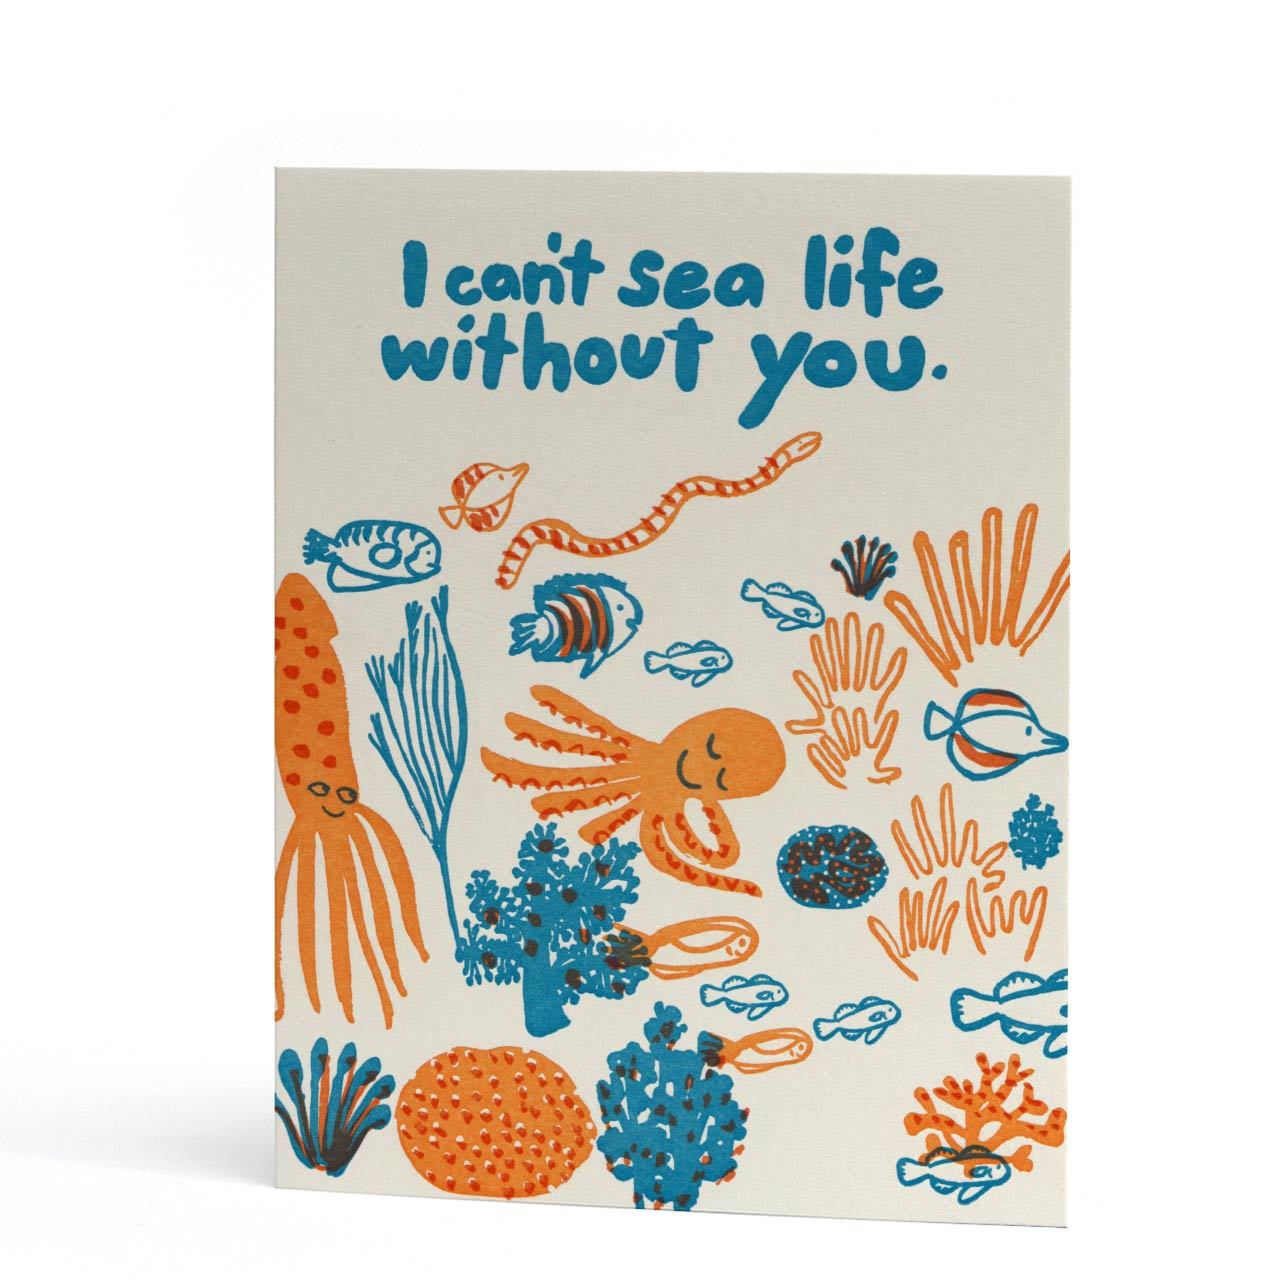 Can't Sea Life Without You Letterpress Greeting Card